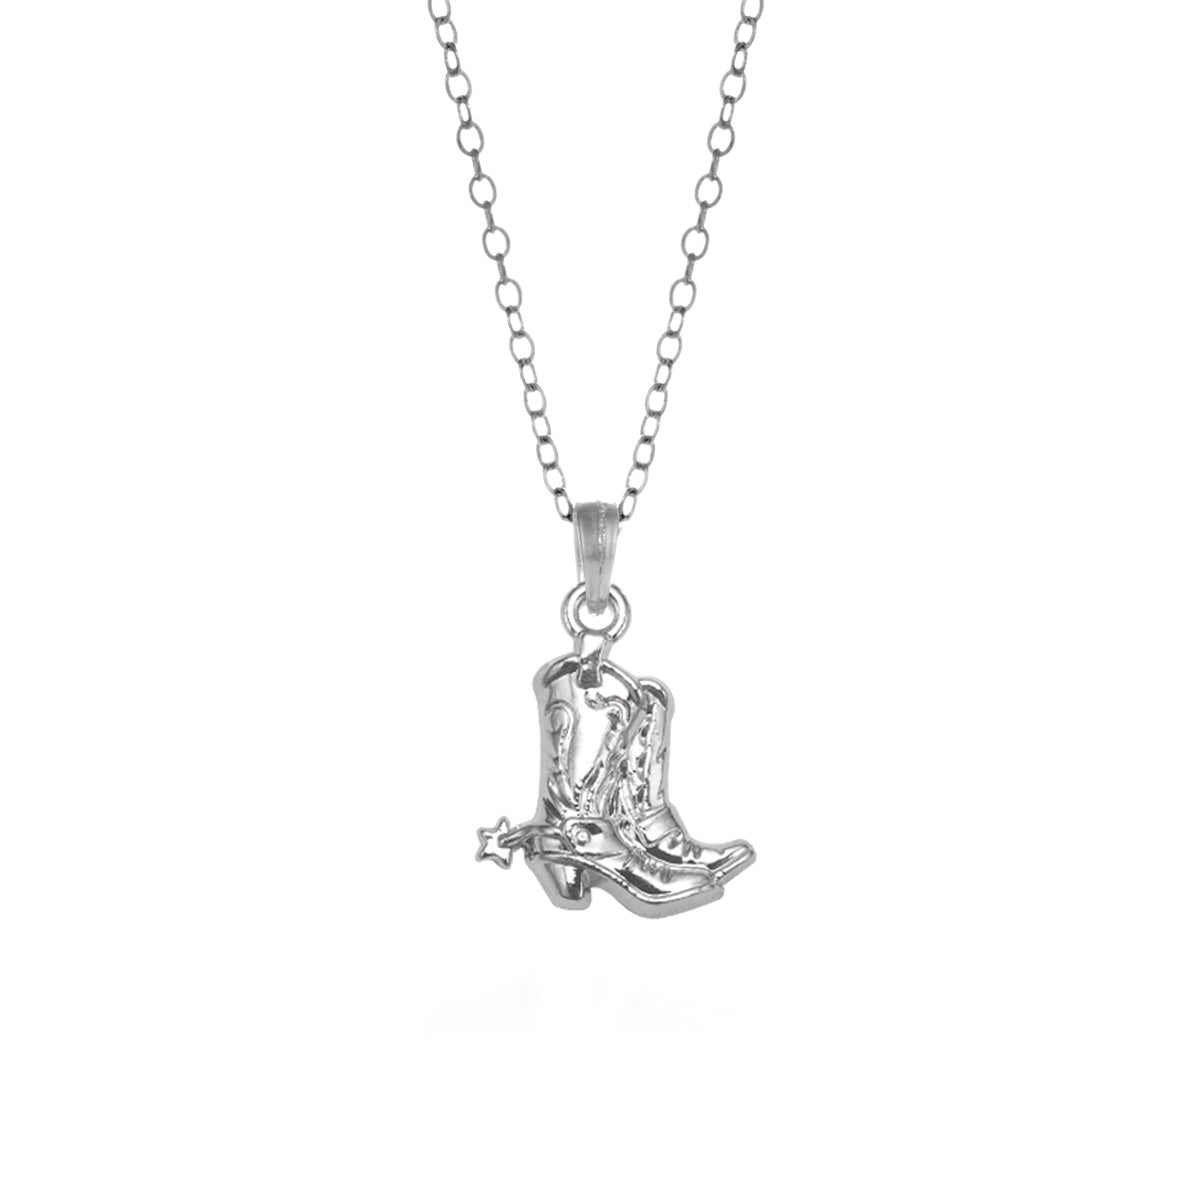 Silver Petite Cowgirl Boot Charm Classic Necklace